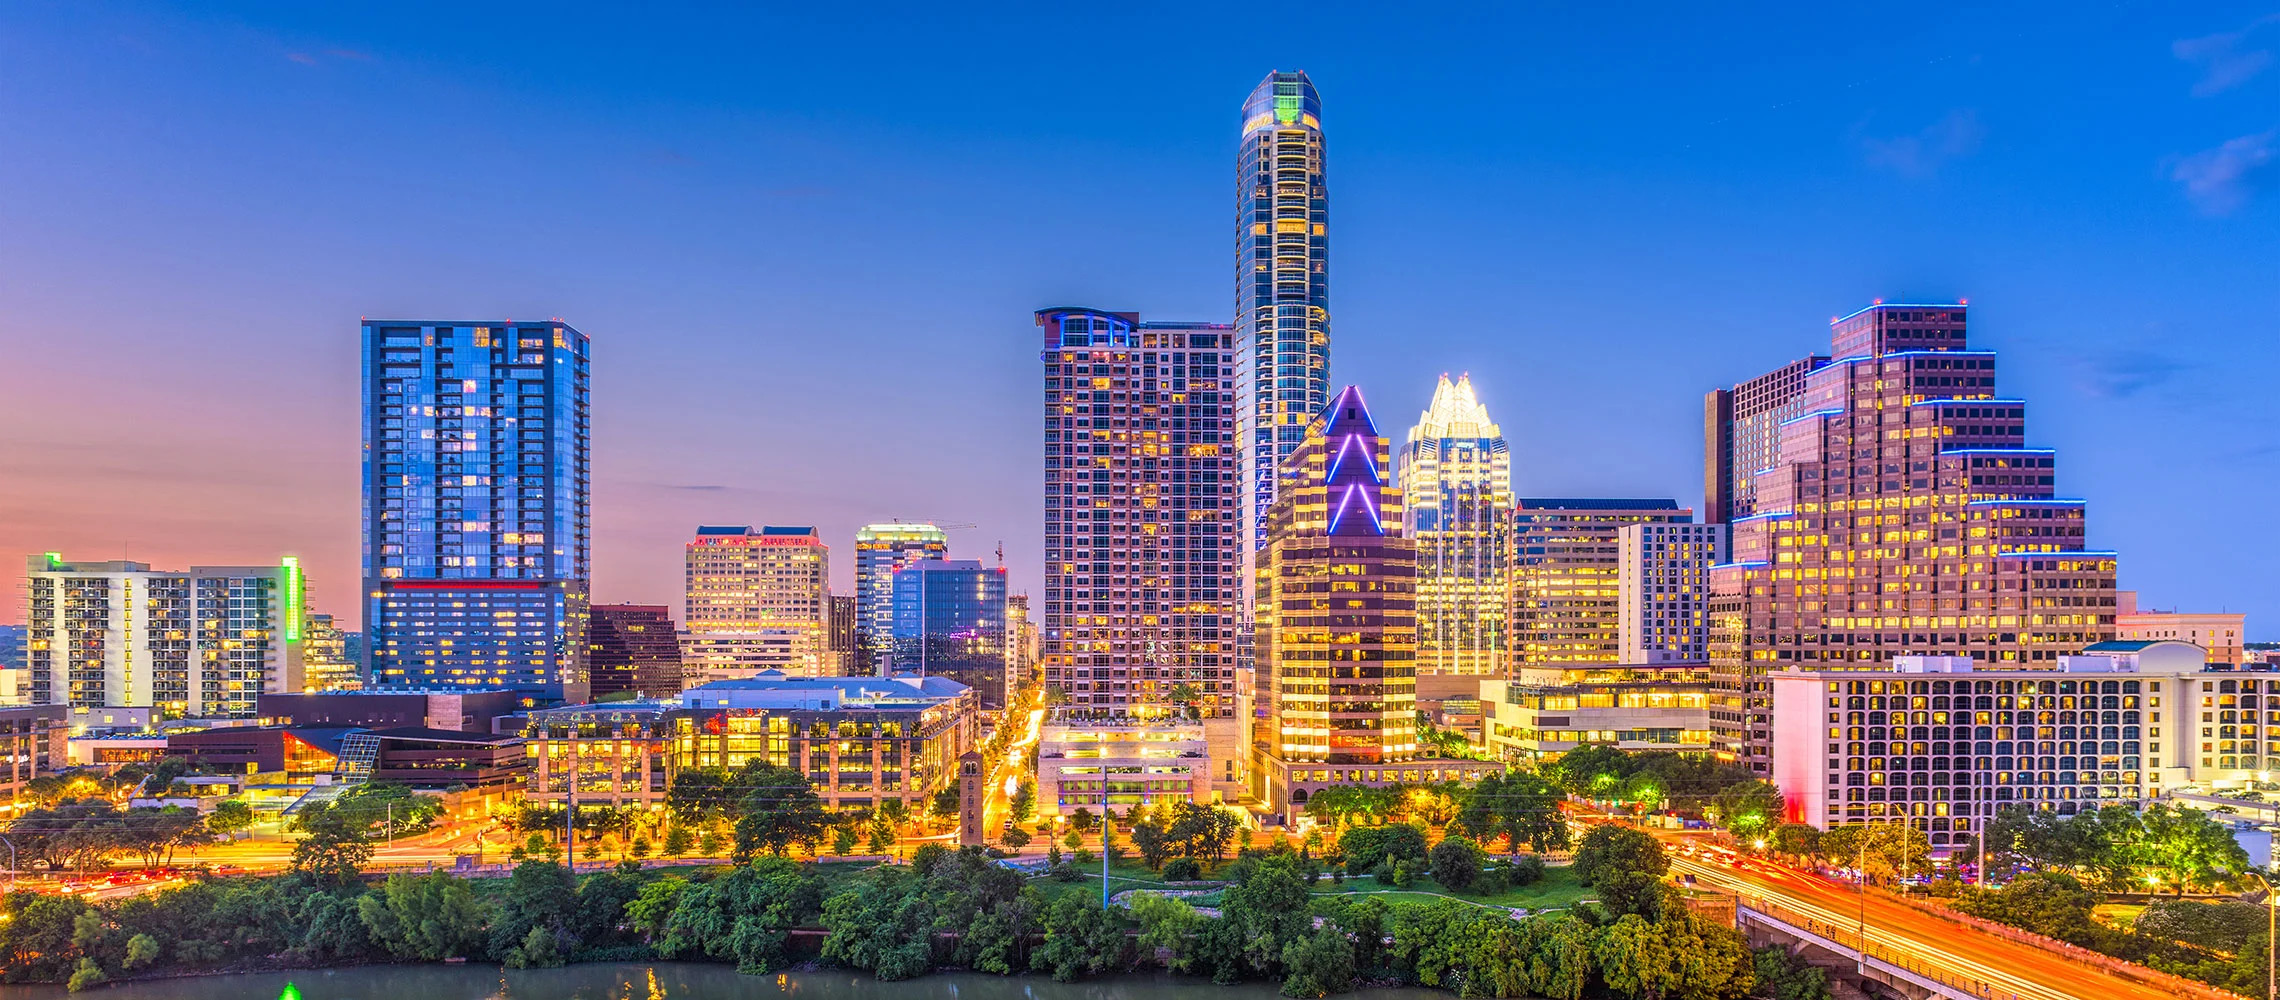 34 Facts about Austin (TX)